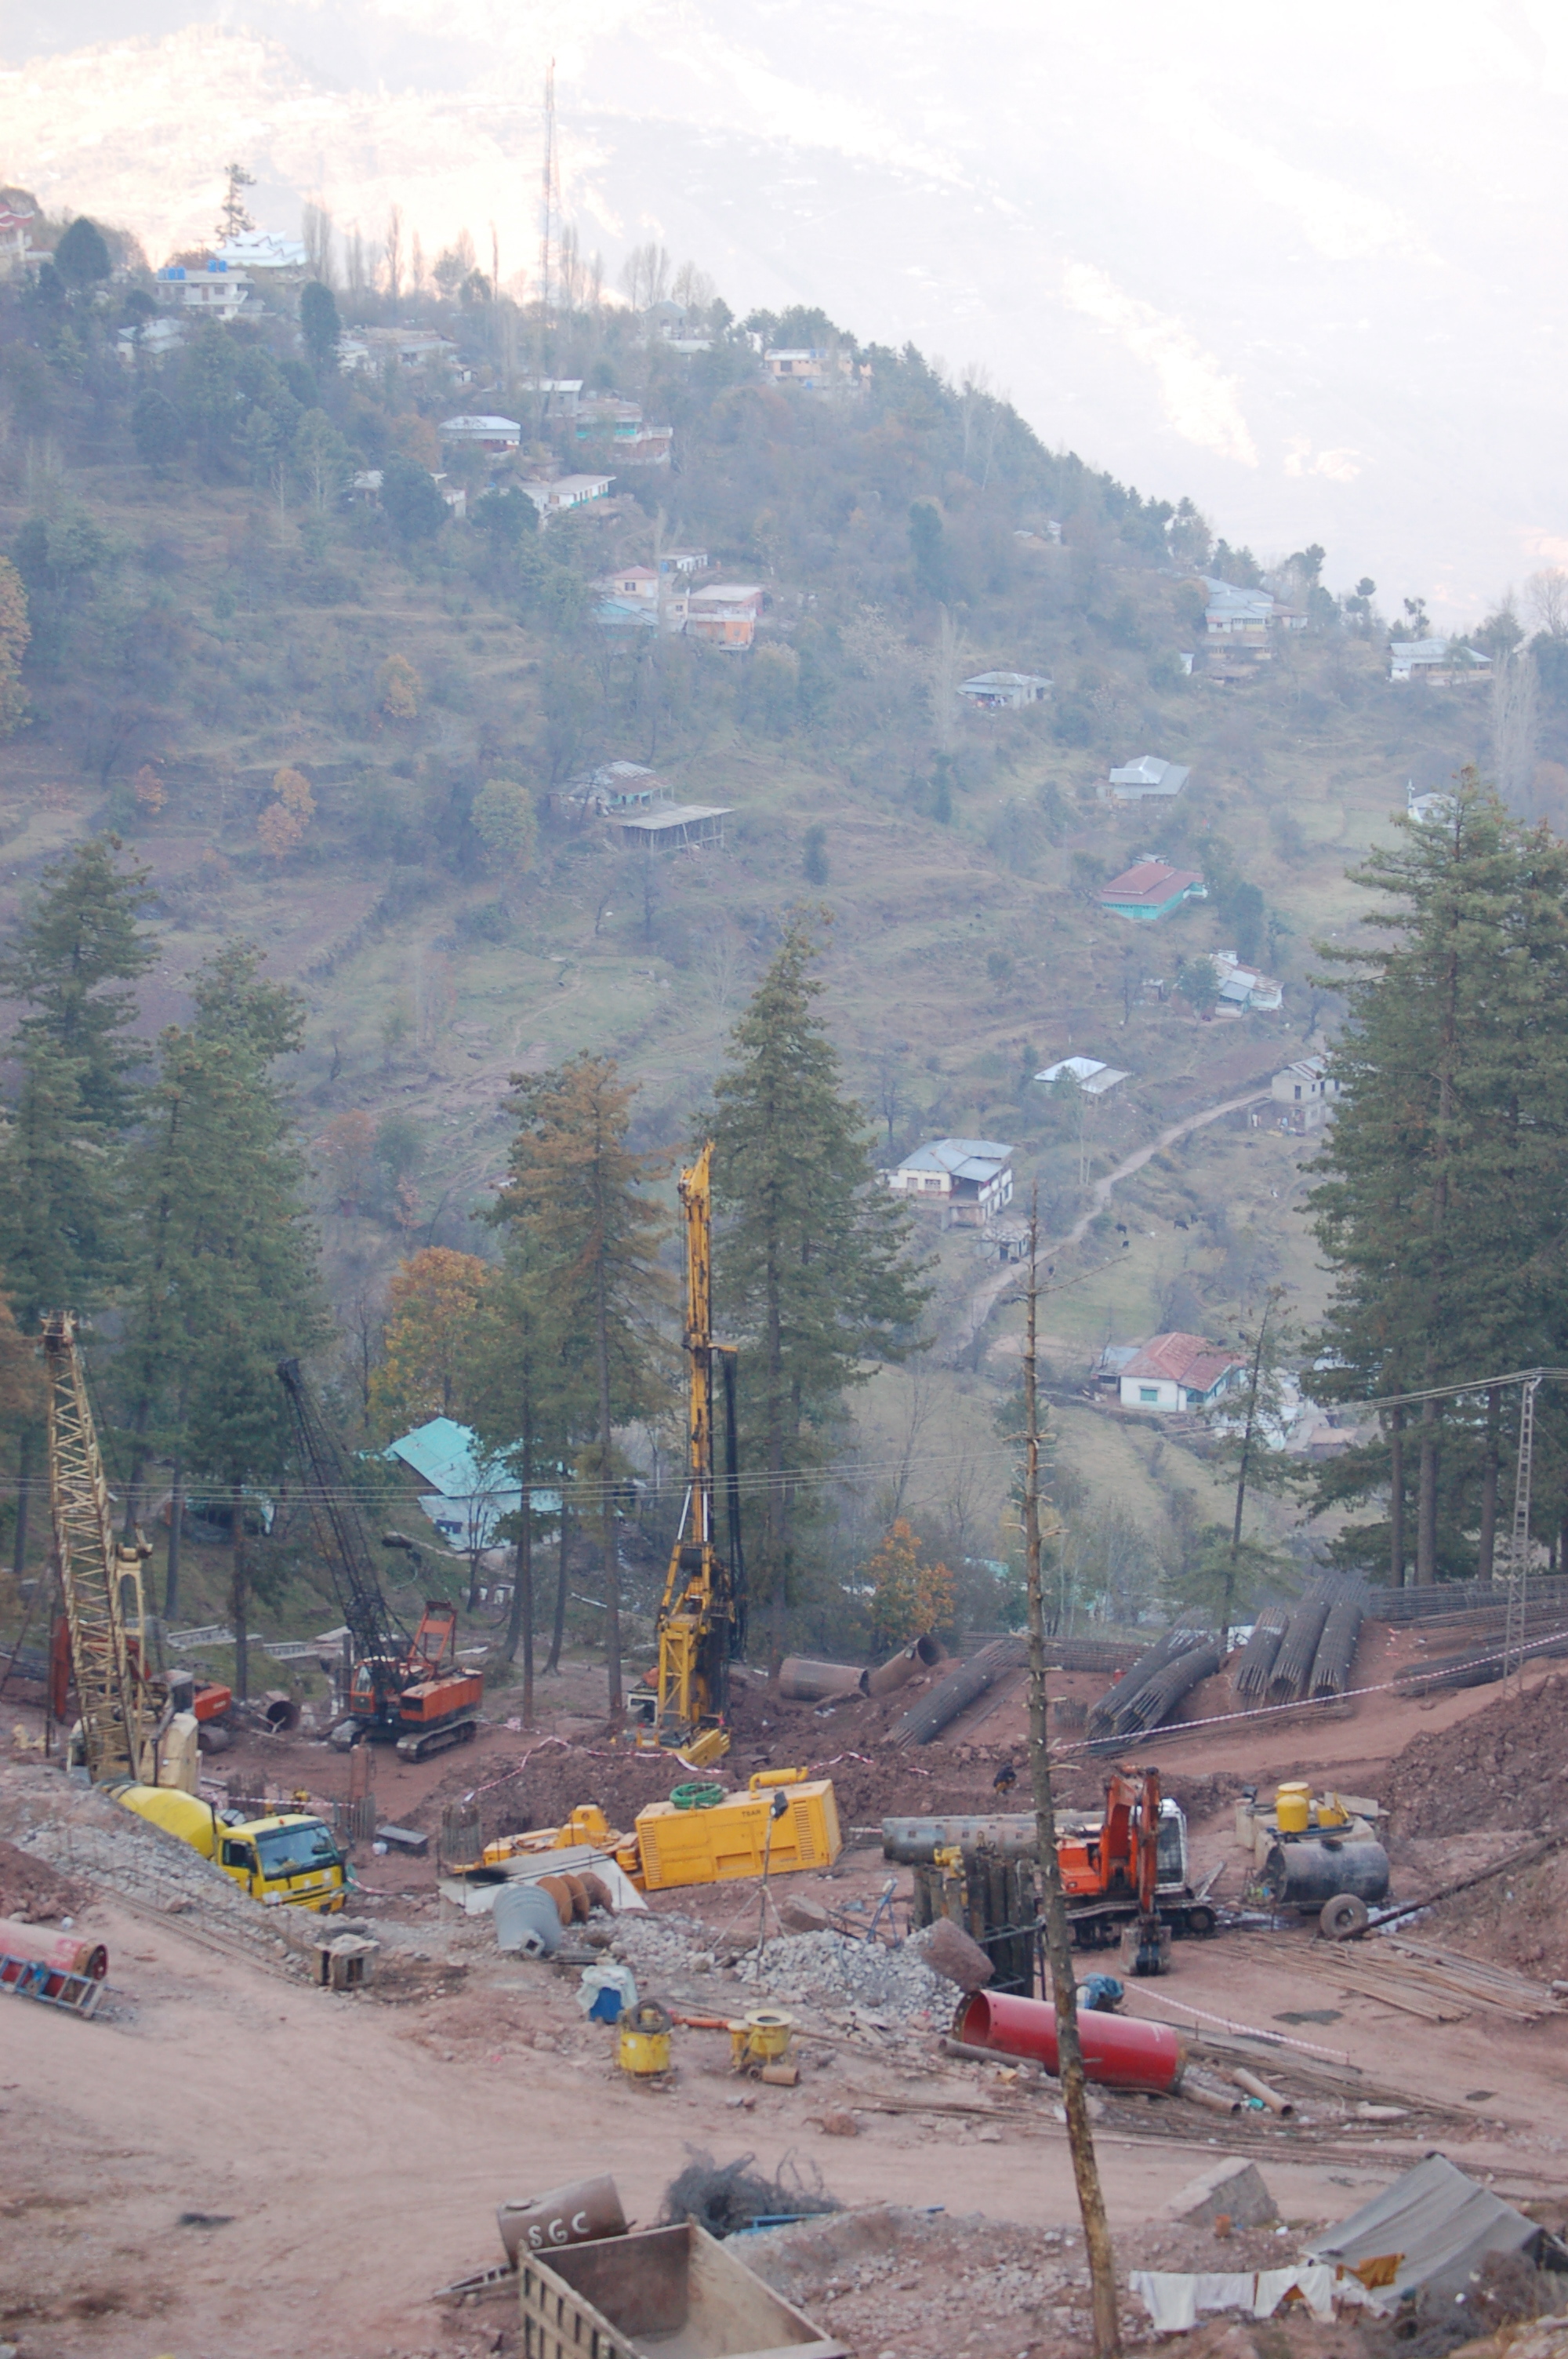 Piling using Hydraulic Rotary Machines for Slope Protection Works at Jhika Gali, Murree 8